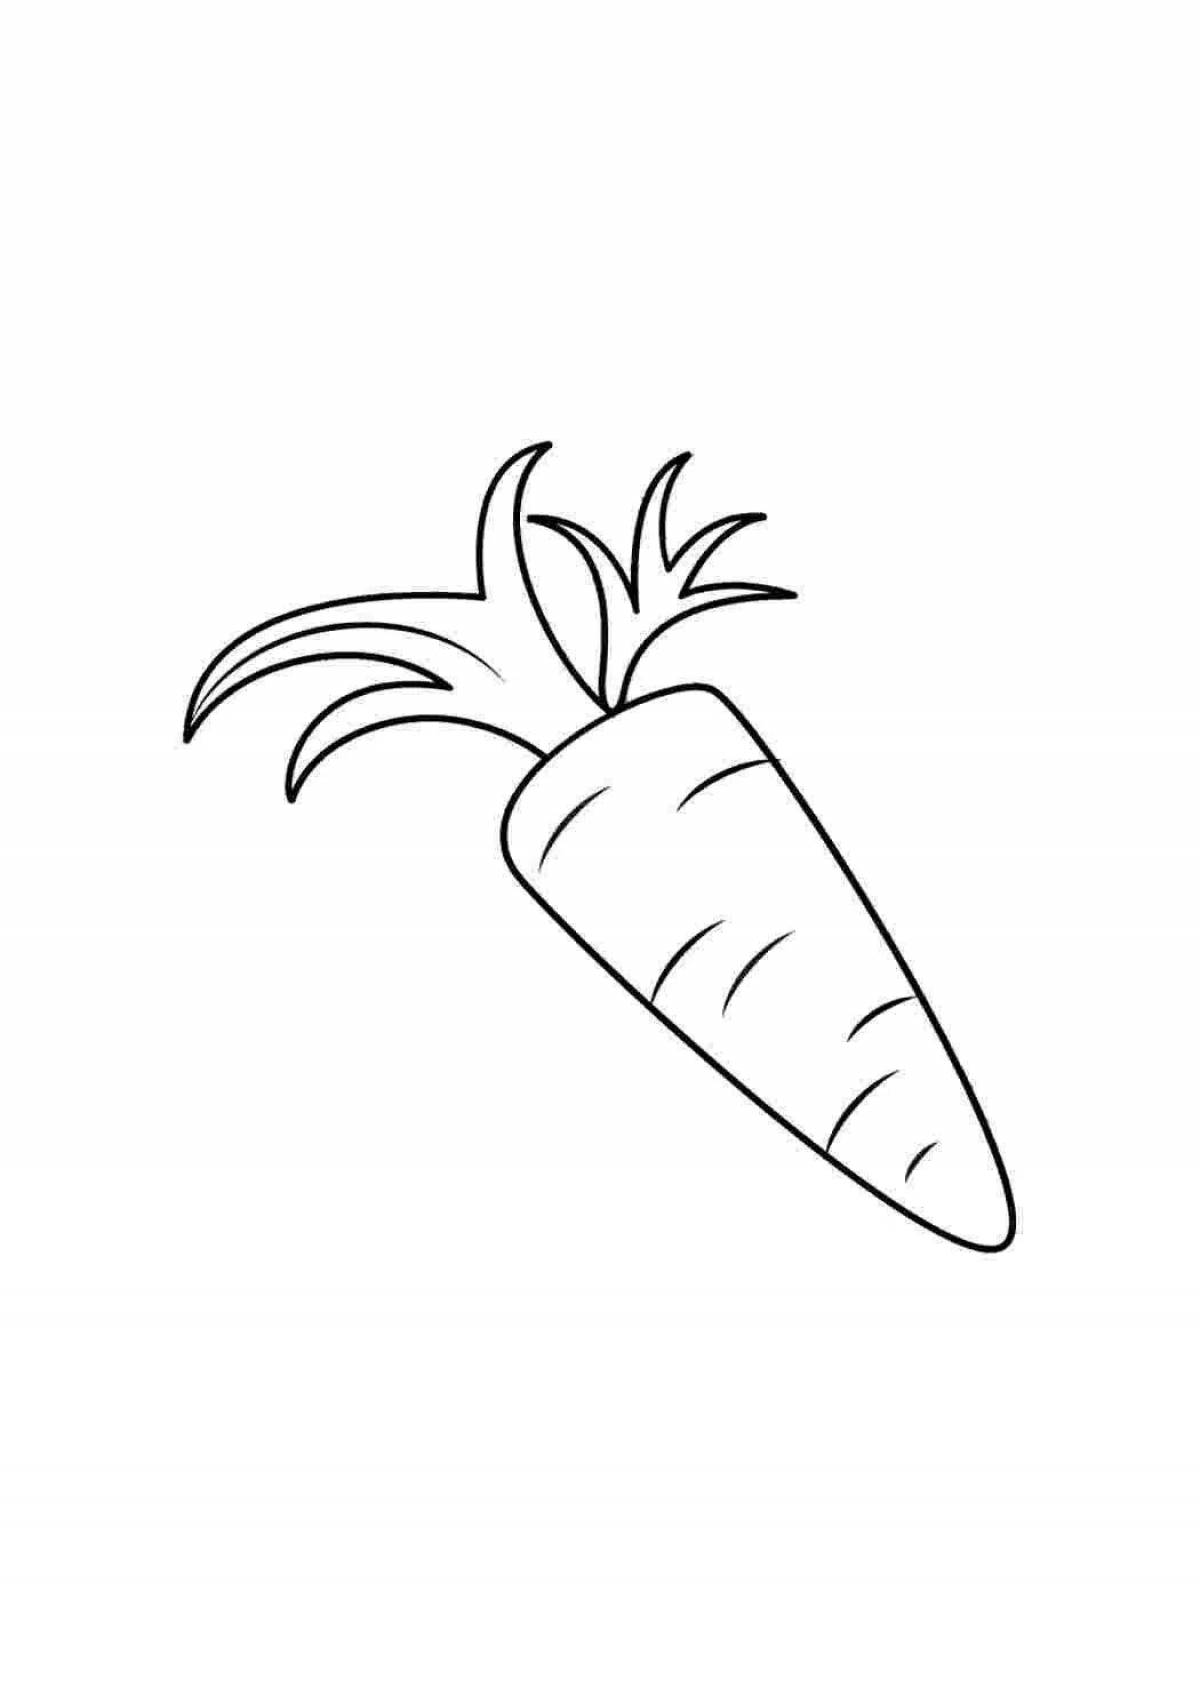 Adorable carrot drawing for kids